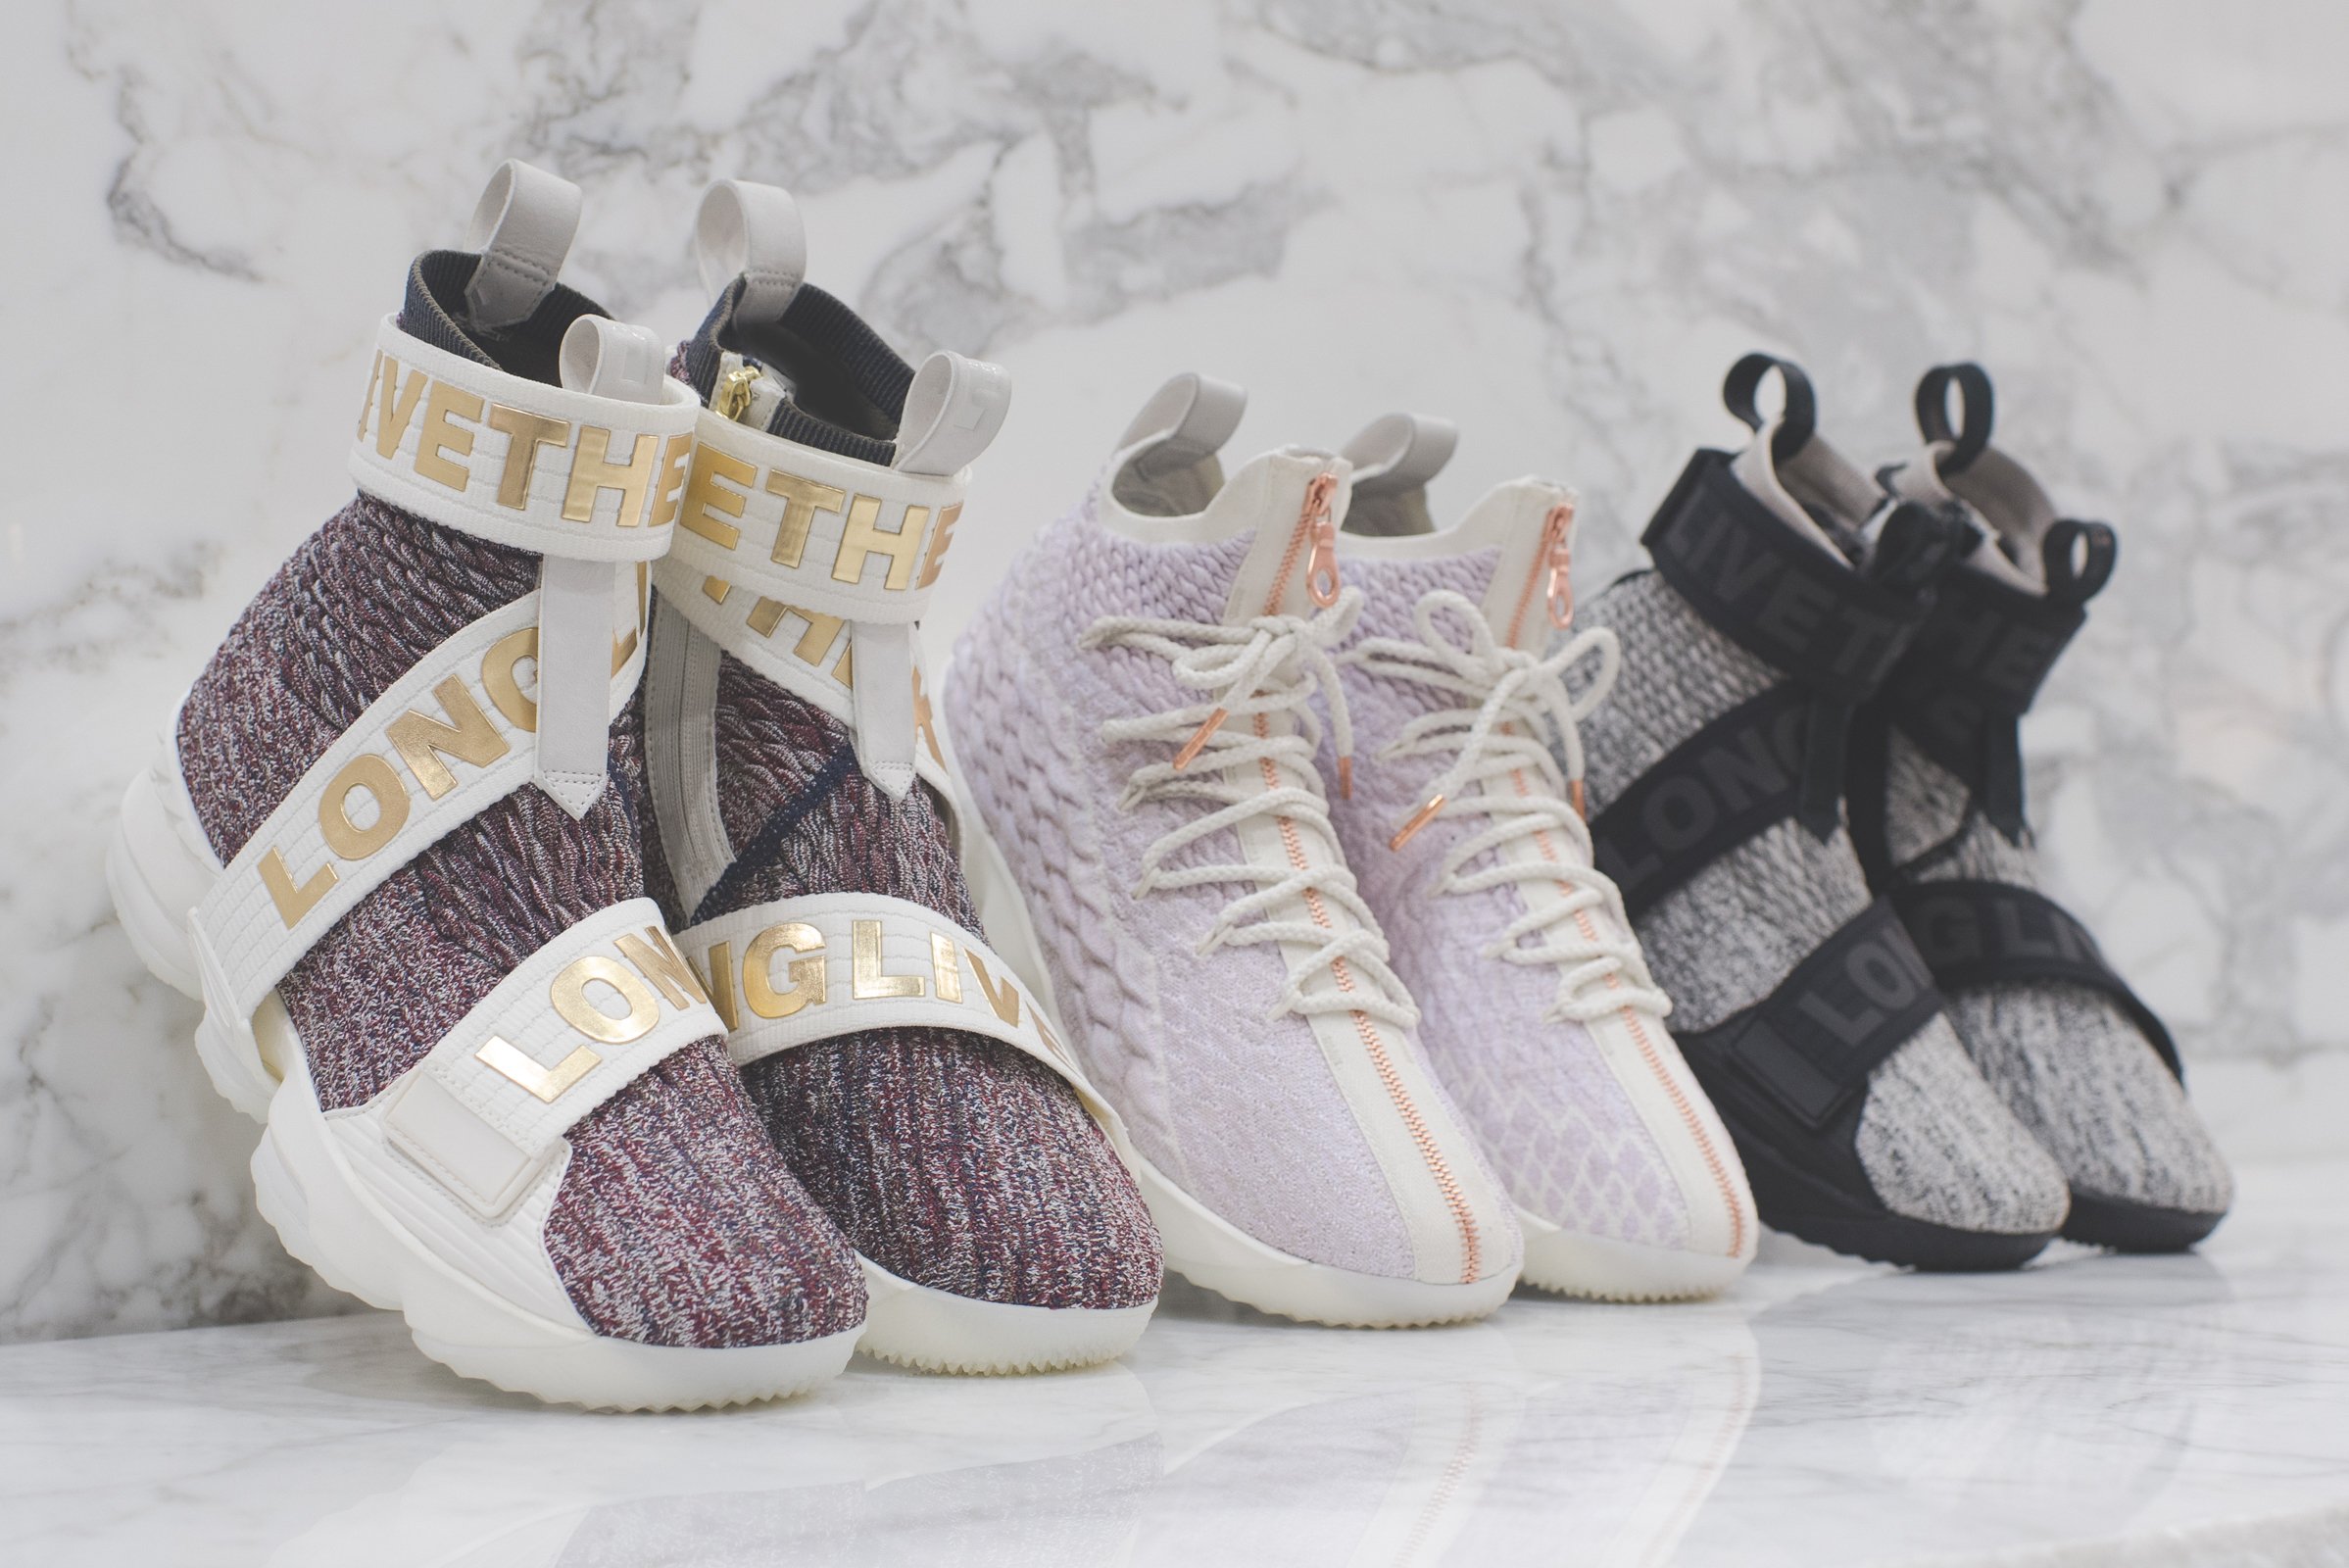 Kith x Nike LeBron 15 &#x27;Long Live The King&#x27; Collection